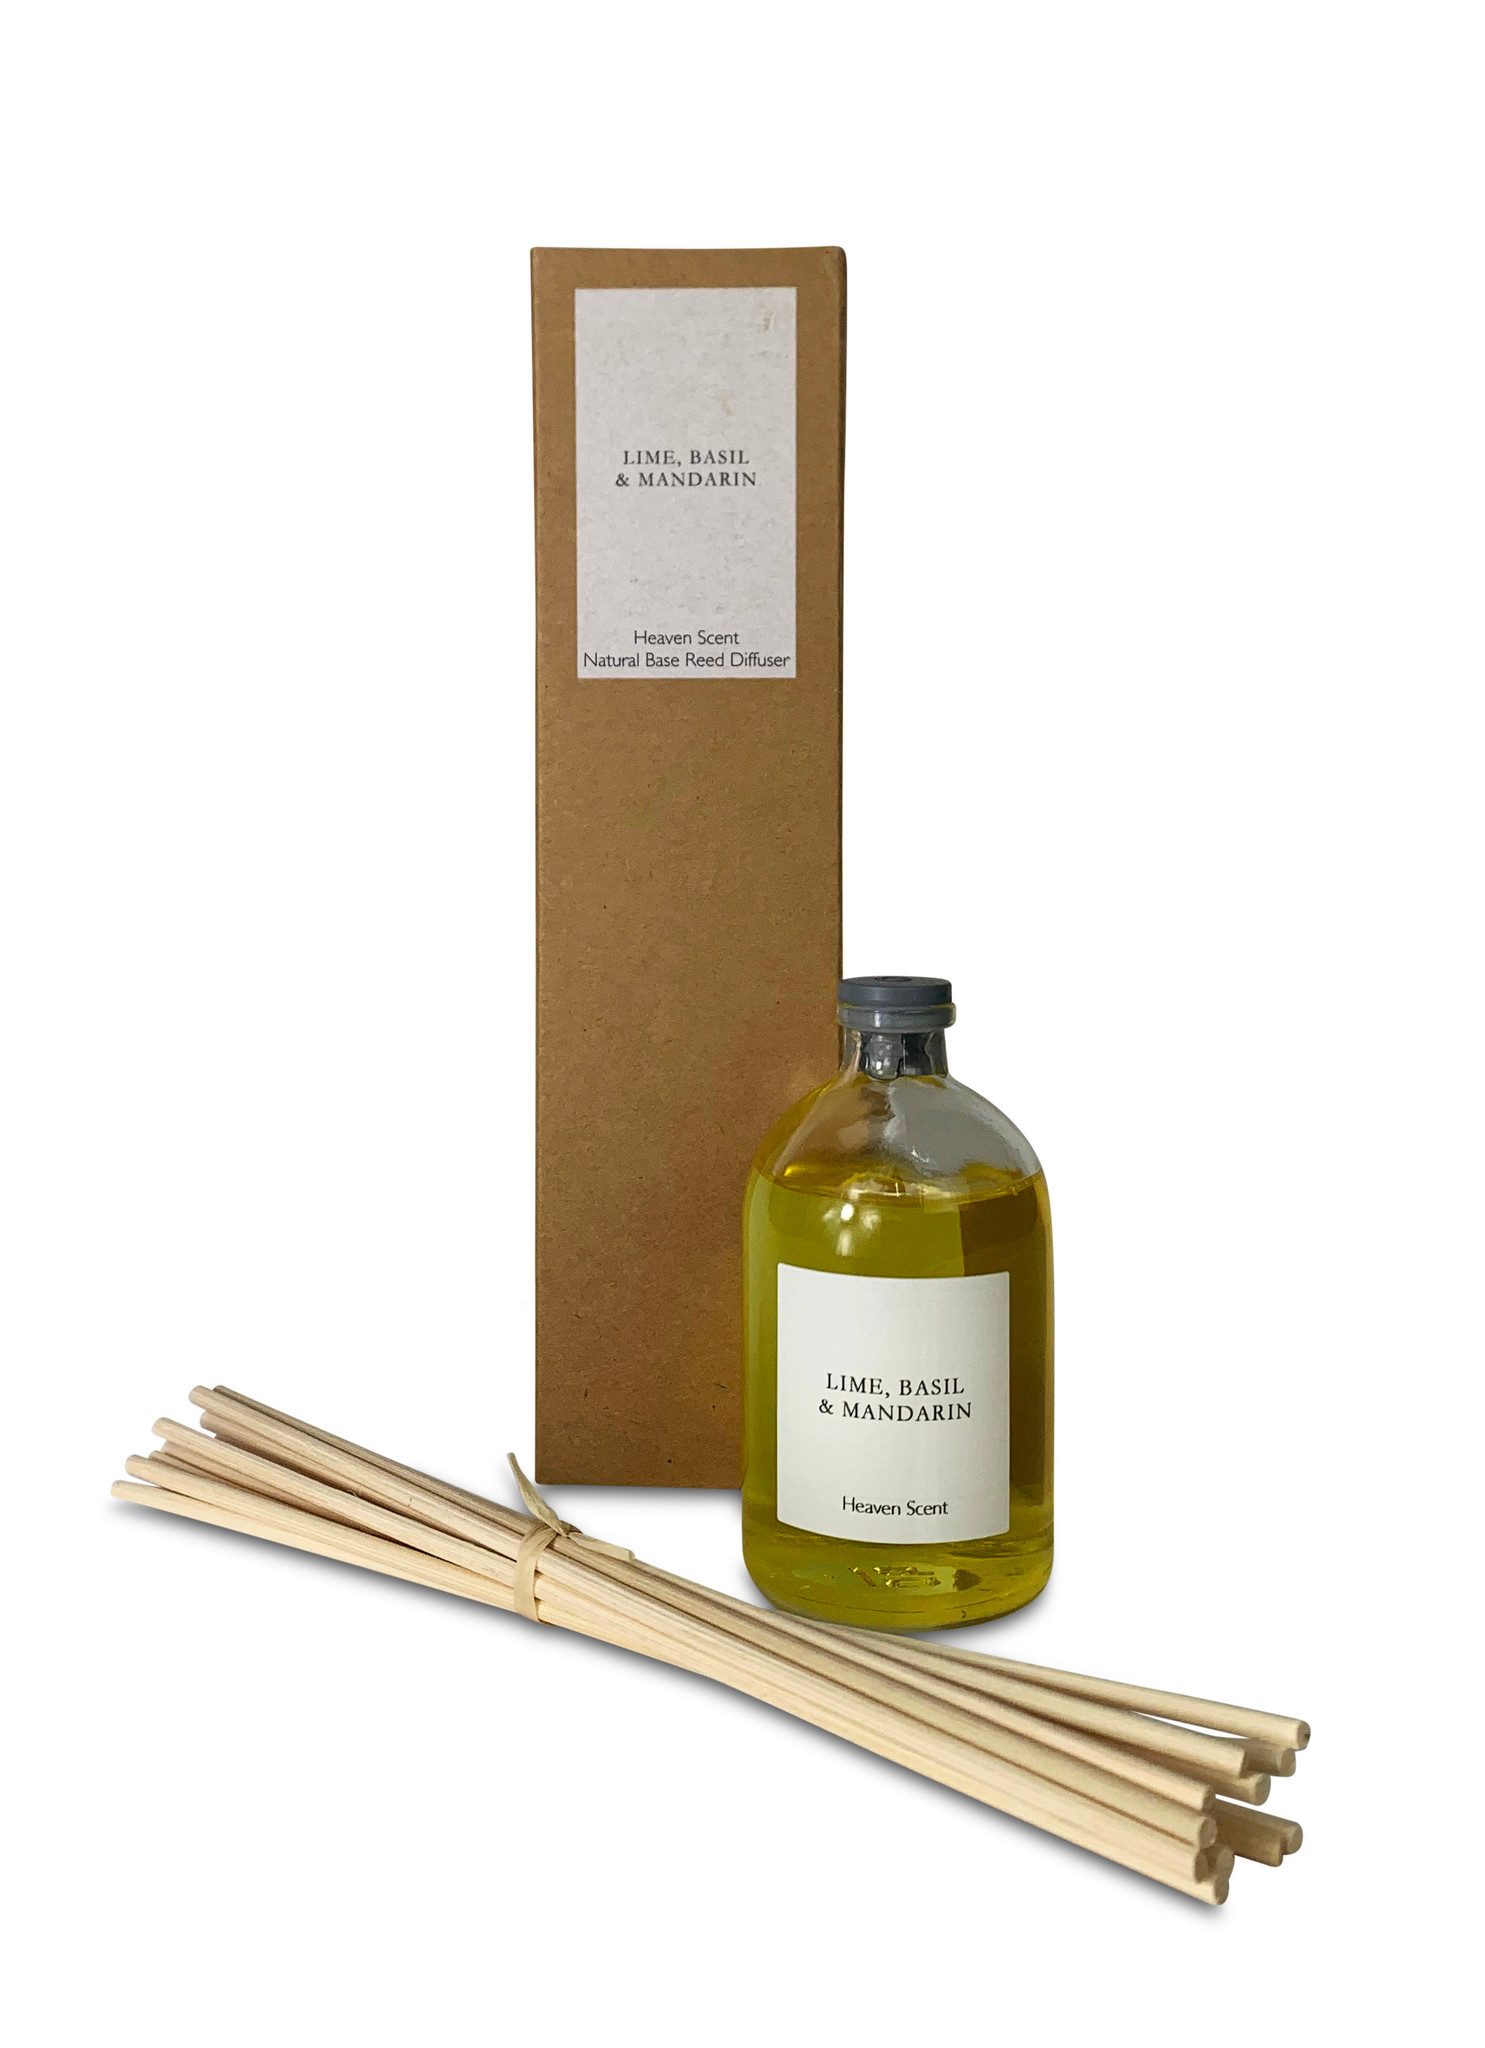 Lime, Basil & Mandarin 100ml Clear Apothecary Reed Diffuser by Heaven Scent